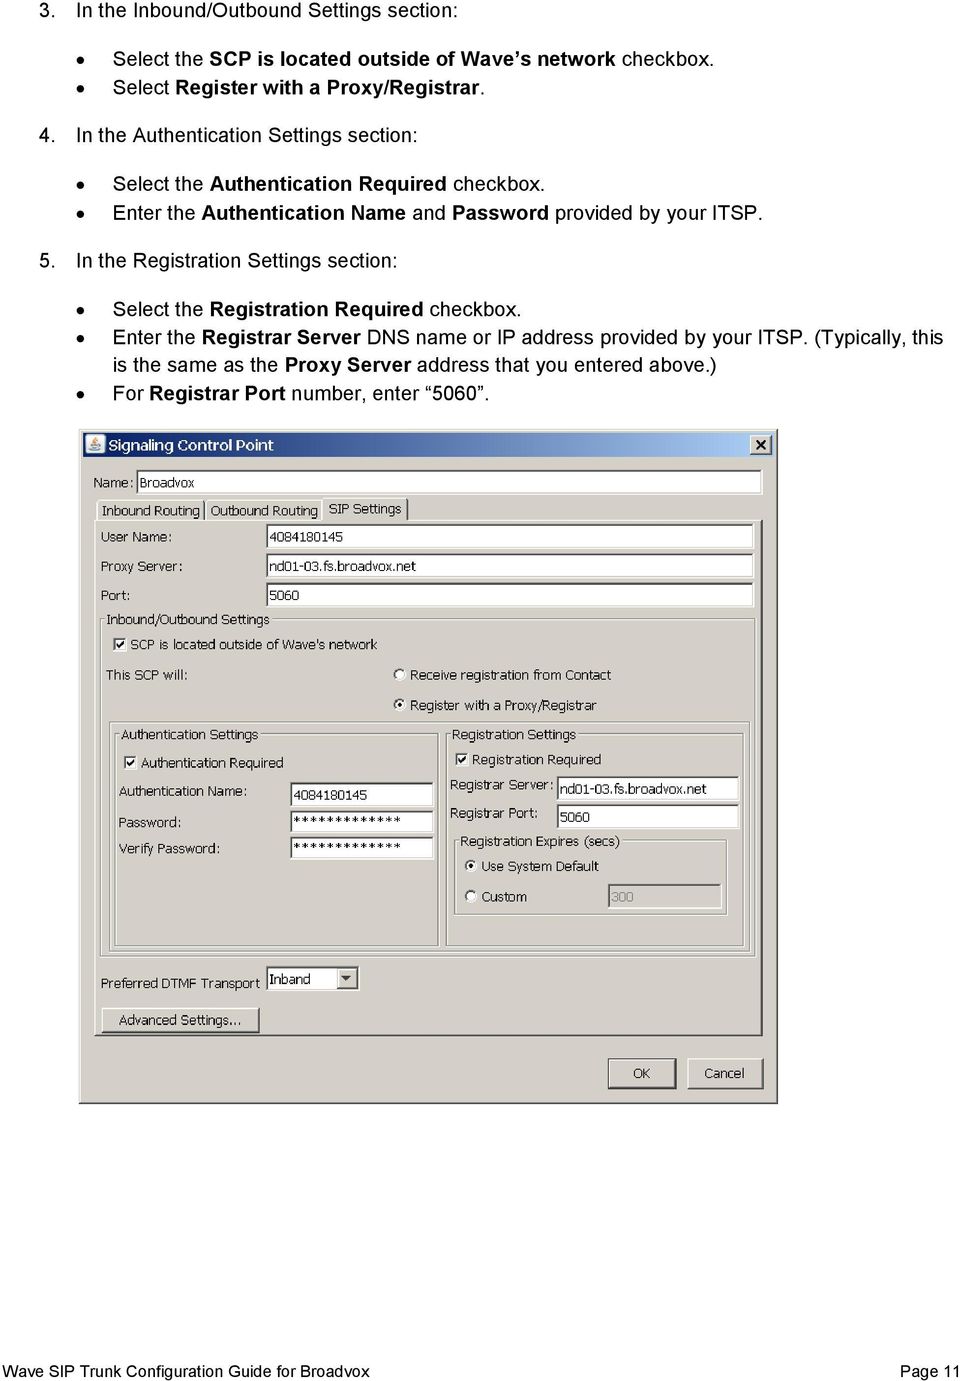 In the Registration Settings section: Select the Registration Required checkbox. Enter the Registrar Server DNS name or IP address provided by your ITSP.